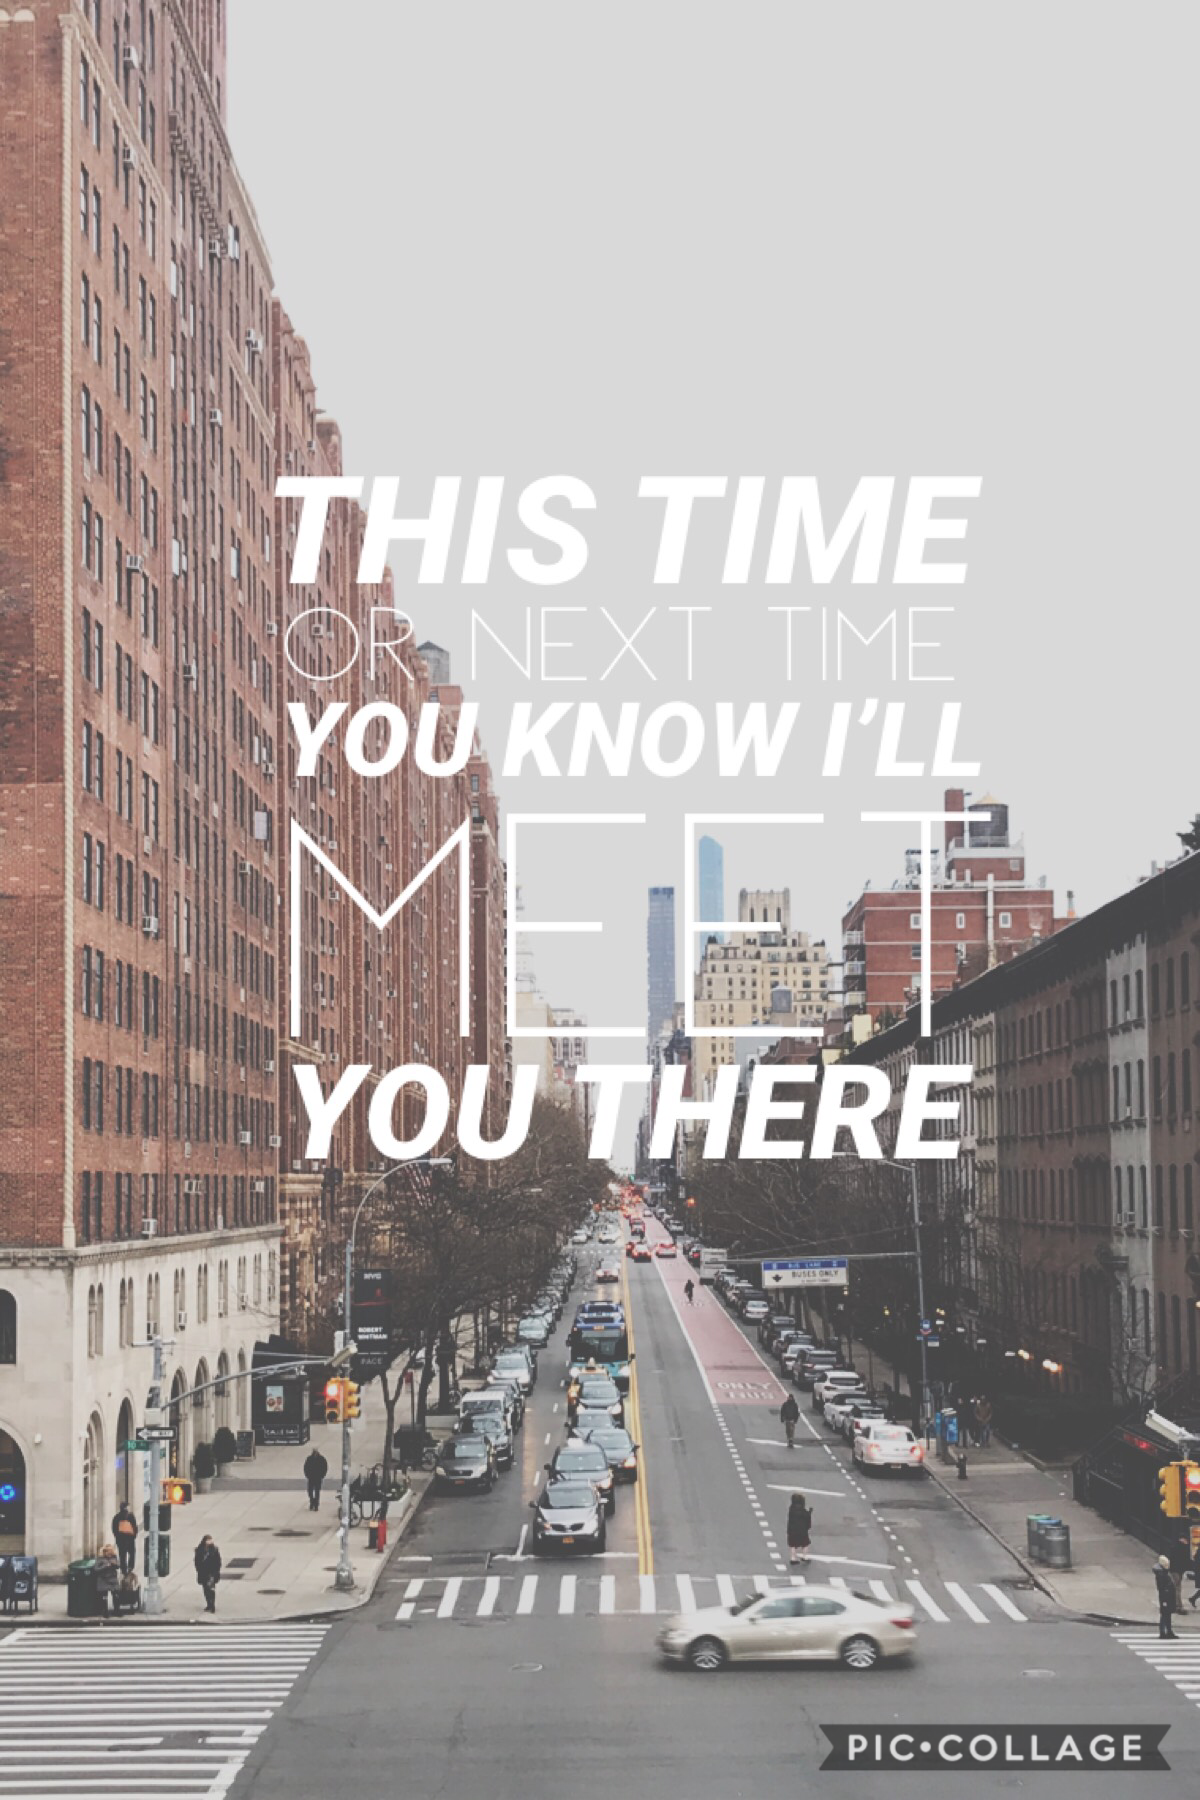 Meet You There- 5 Seconds of Summer